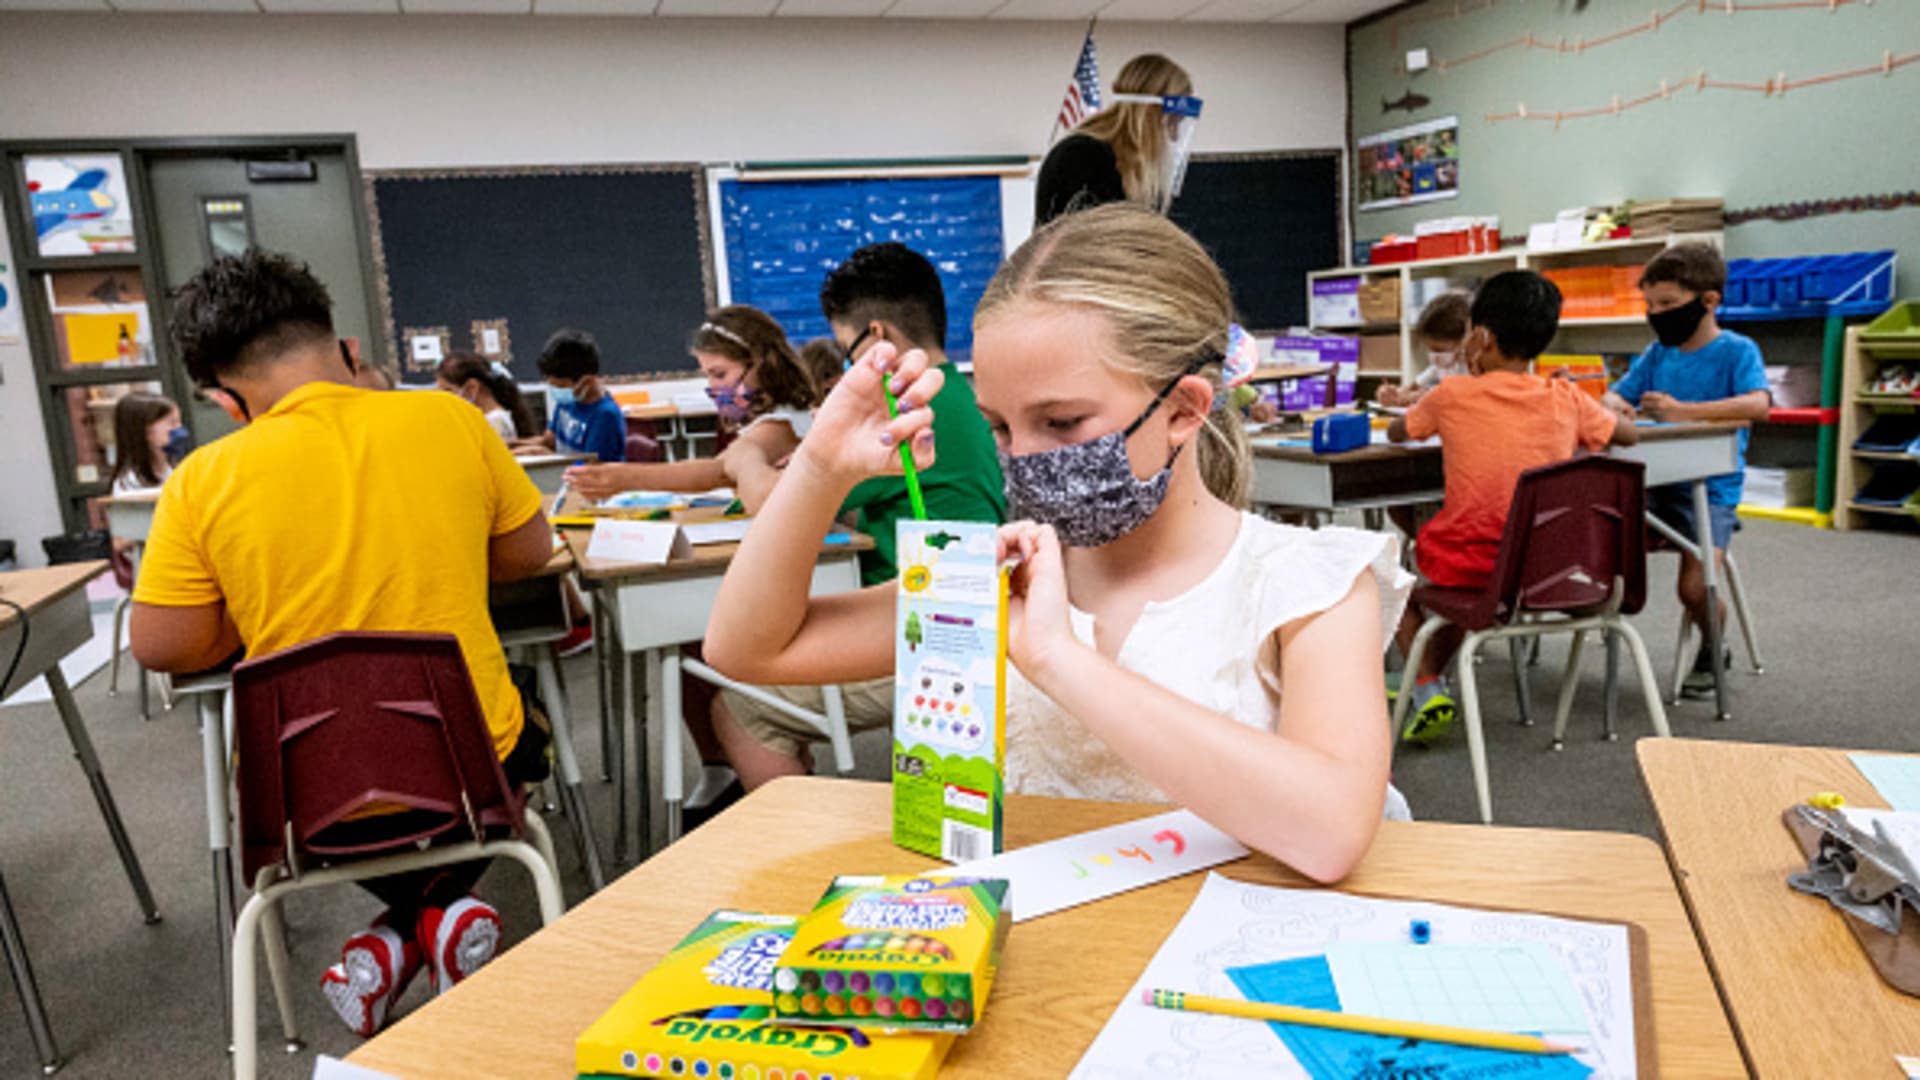 A student works on her name tag in a second and third grade combo class during the first day of school at Laguna Niguel Elementary School in Laguna Niguel, CA on Tuesday, August 17, 2021.